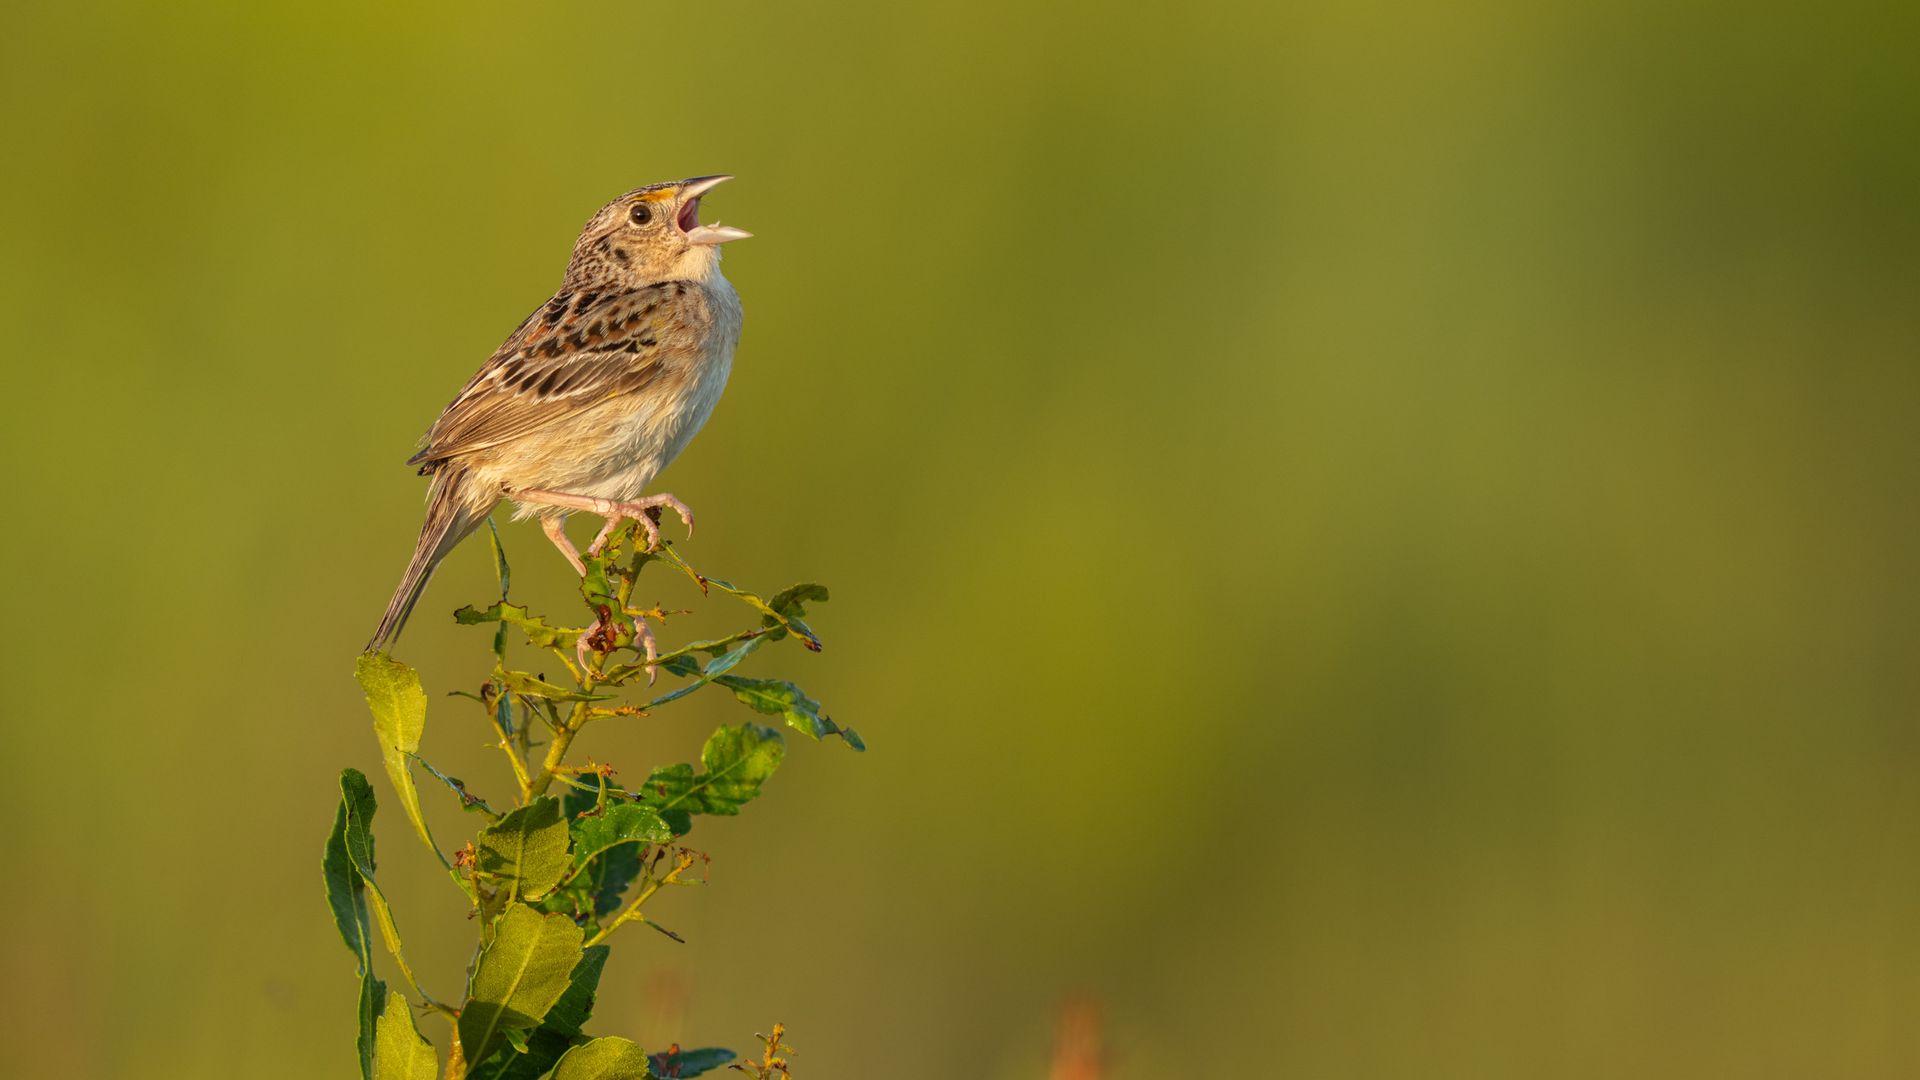 A rare grasshopper sparrow calls out, perched on a branch.